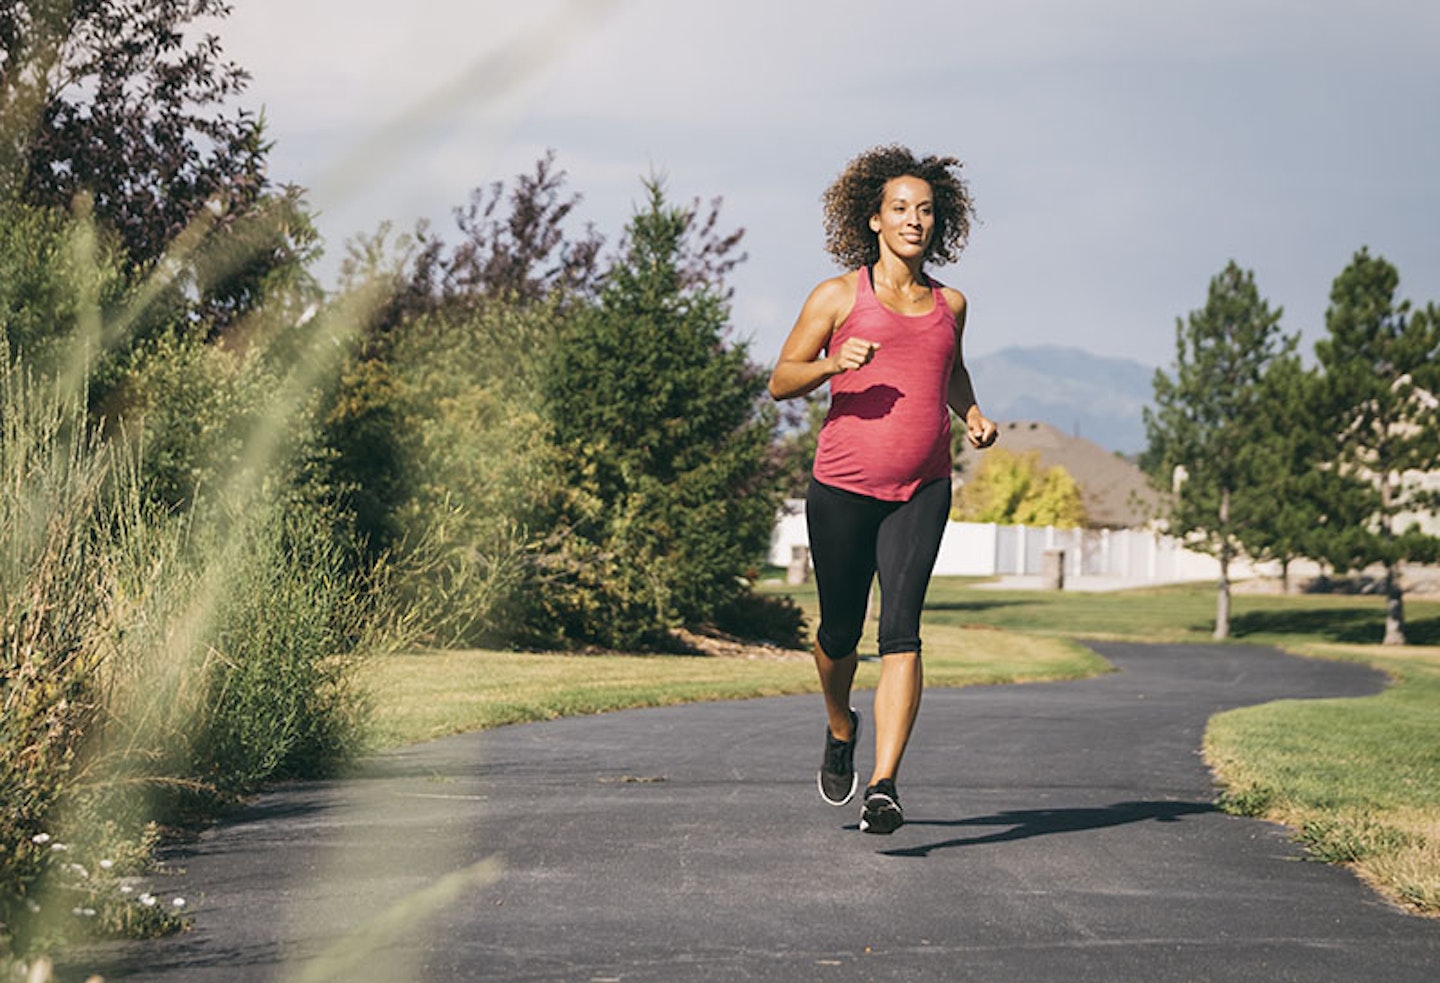 Running while pregnant: is it safe?